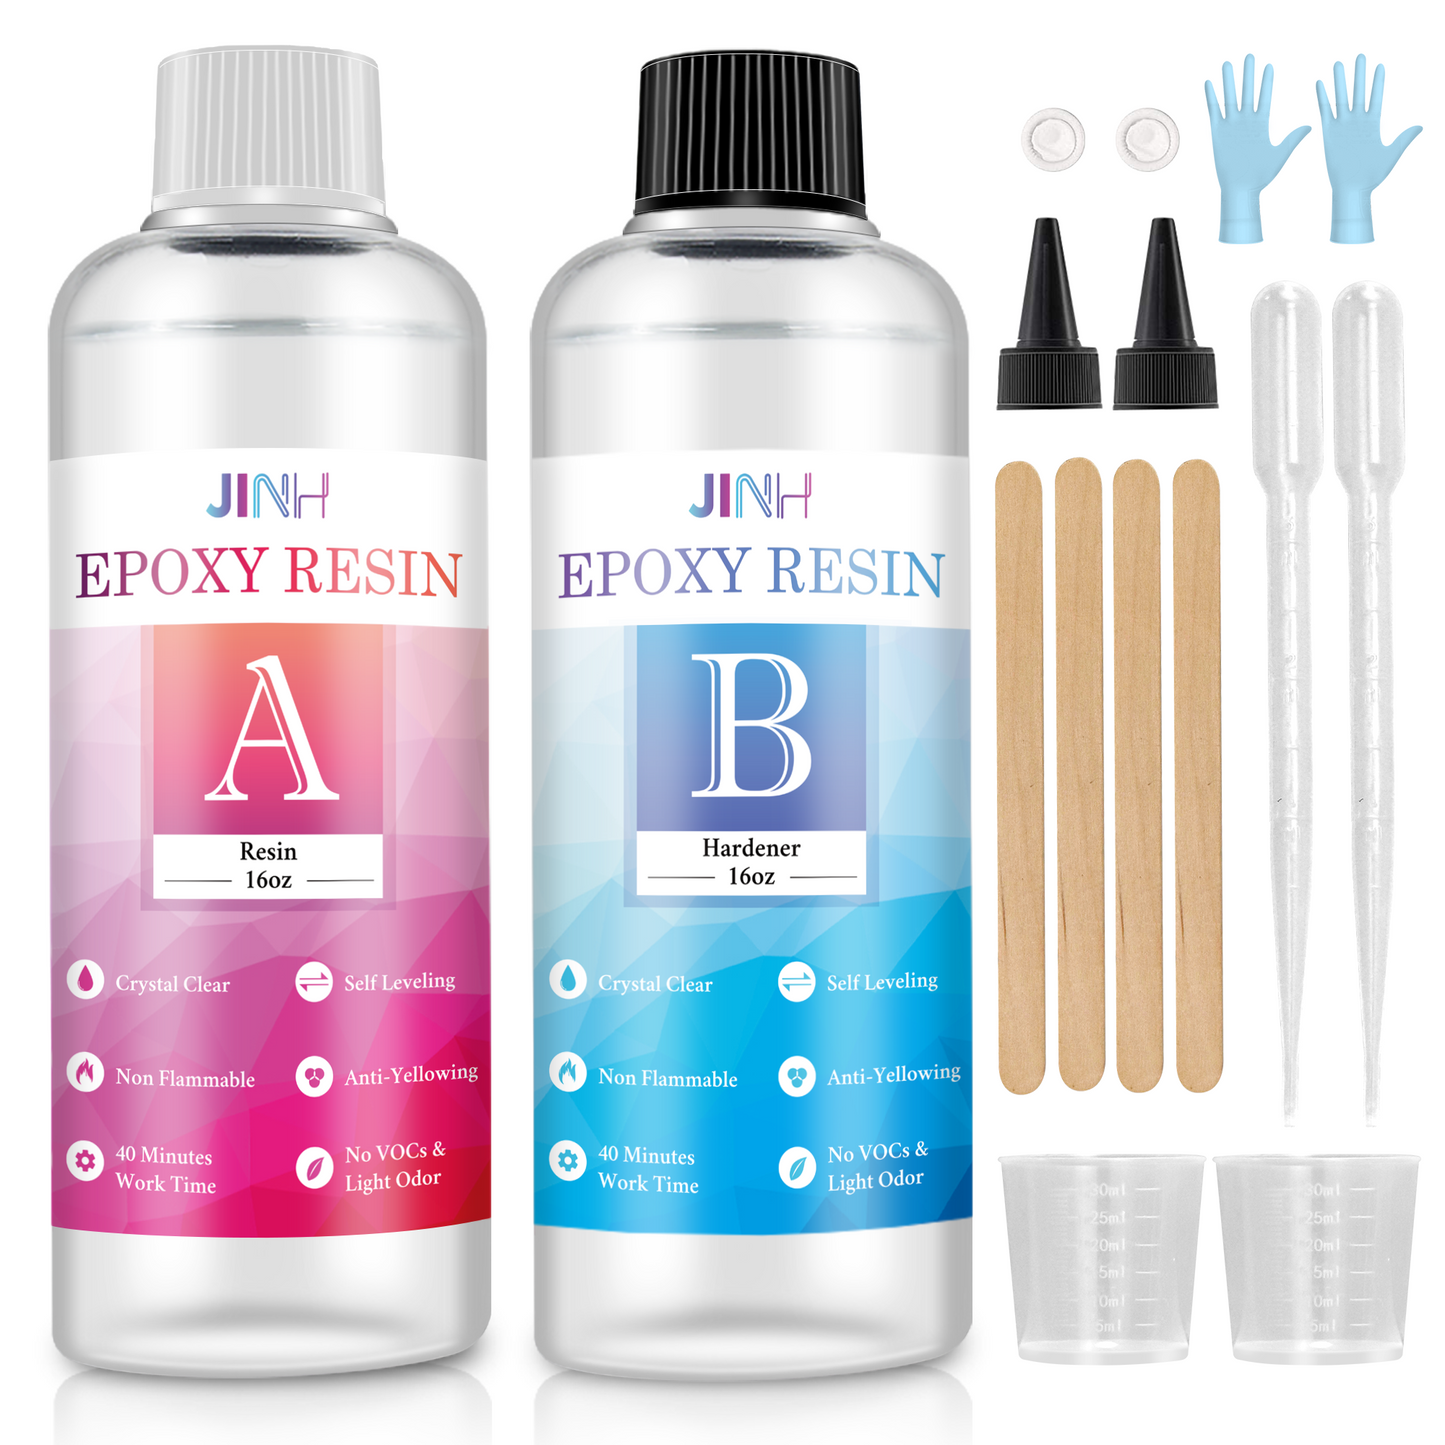 ROR AEM Clear Epoxy Resin Kit - Epoxy Resin 2 Kit Casting and Coating Resin  Supplies 2 Part epoxy Resin for Art Craft with Resin Hexagon Sequins,Resin